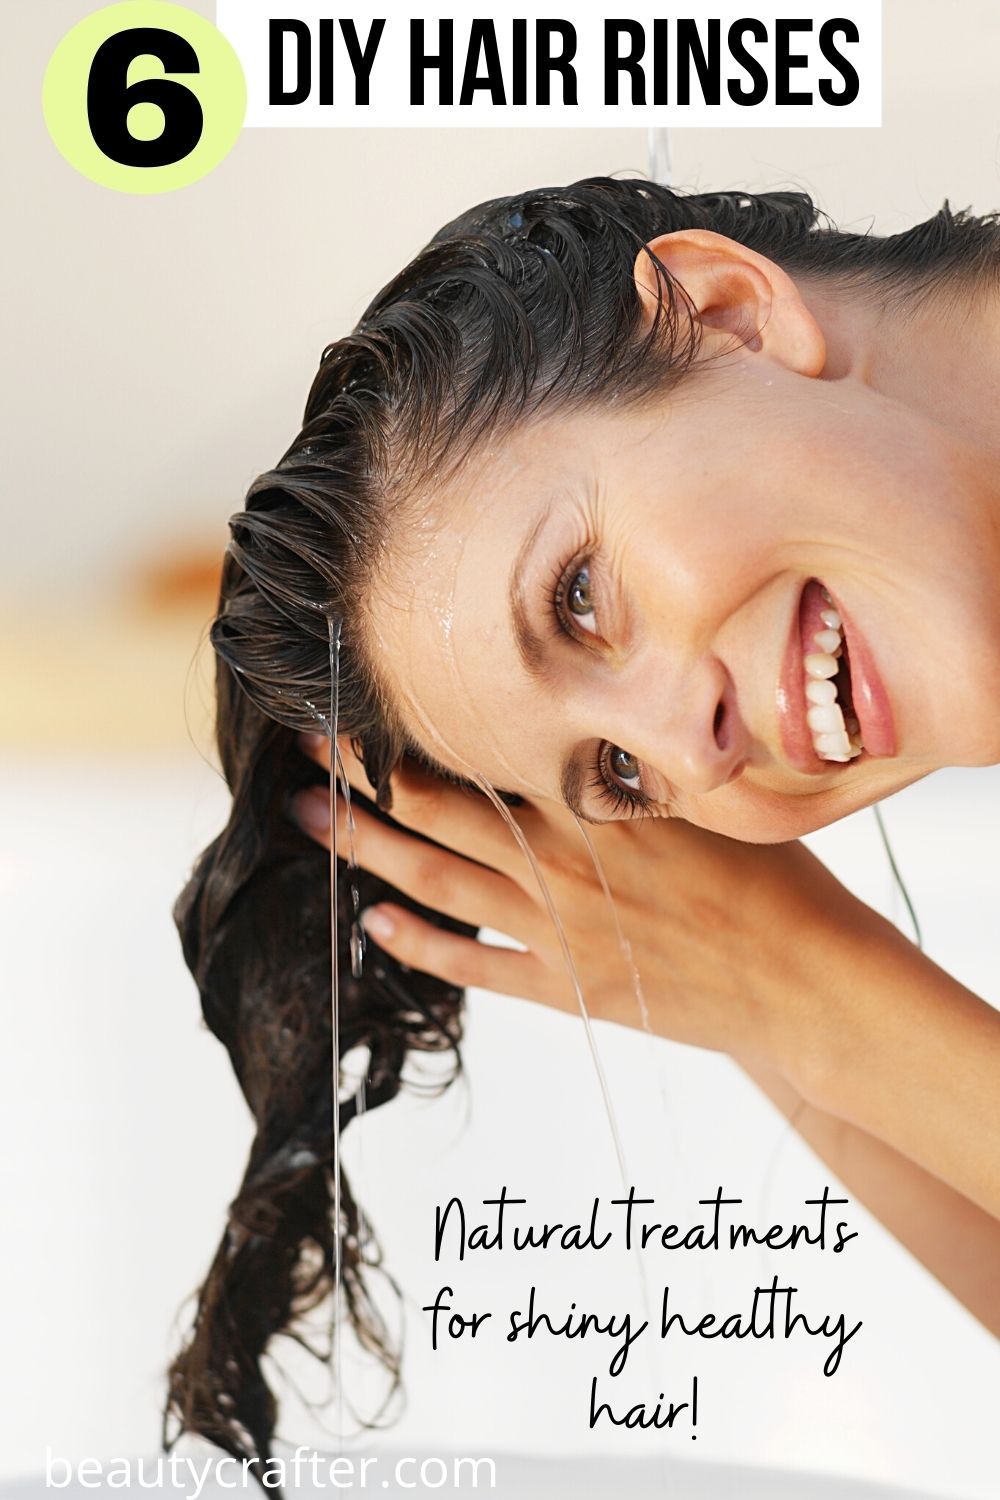 6 DIY Hair Rinses for Shiny Healthy Hair - Beauty Crafter